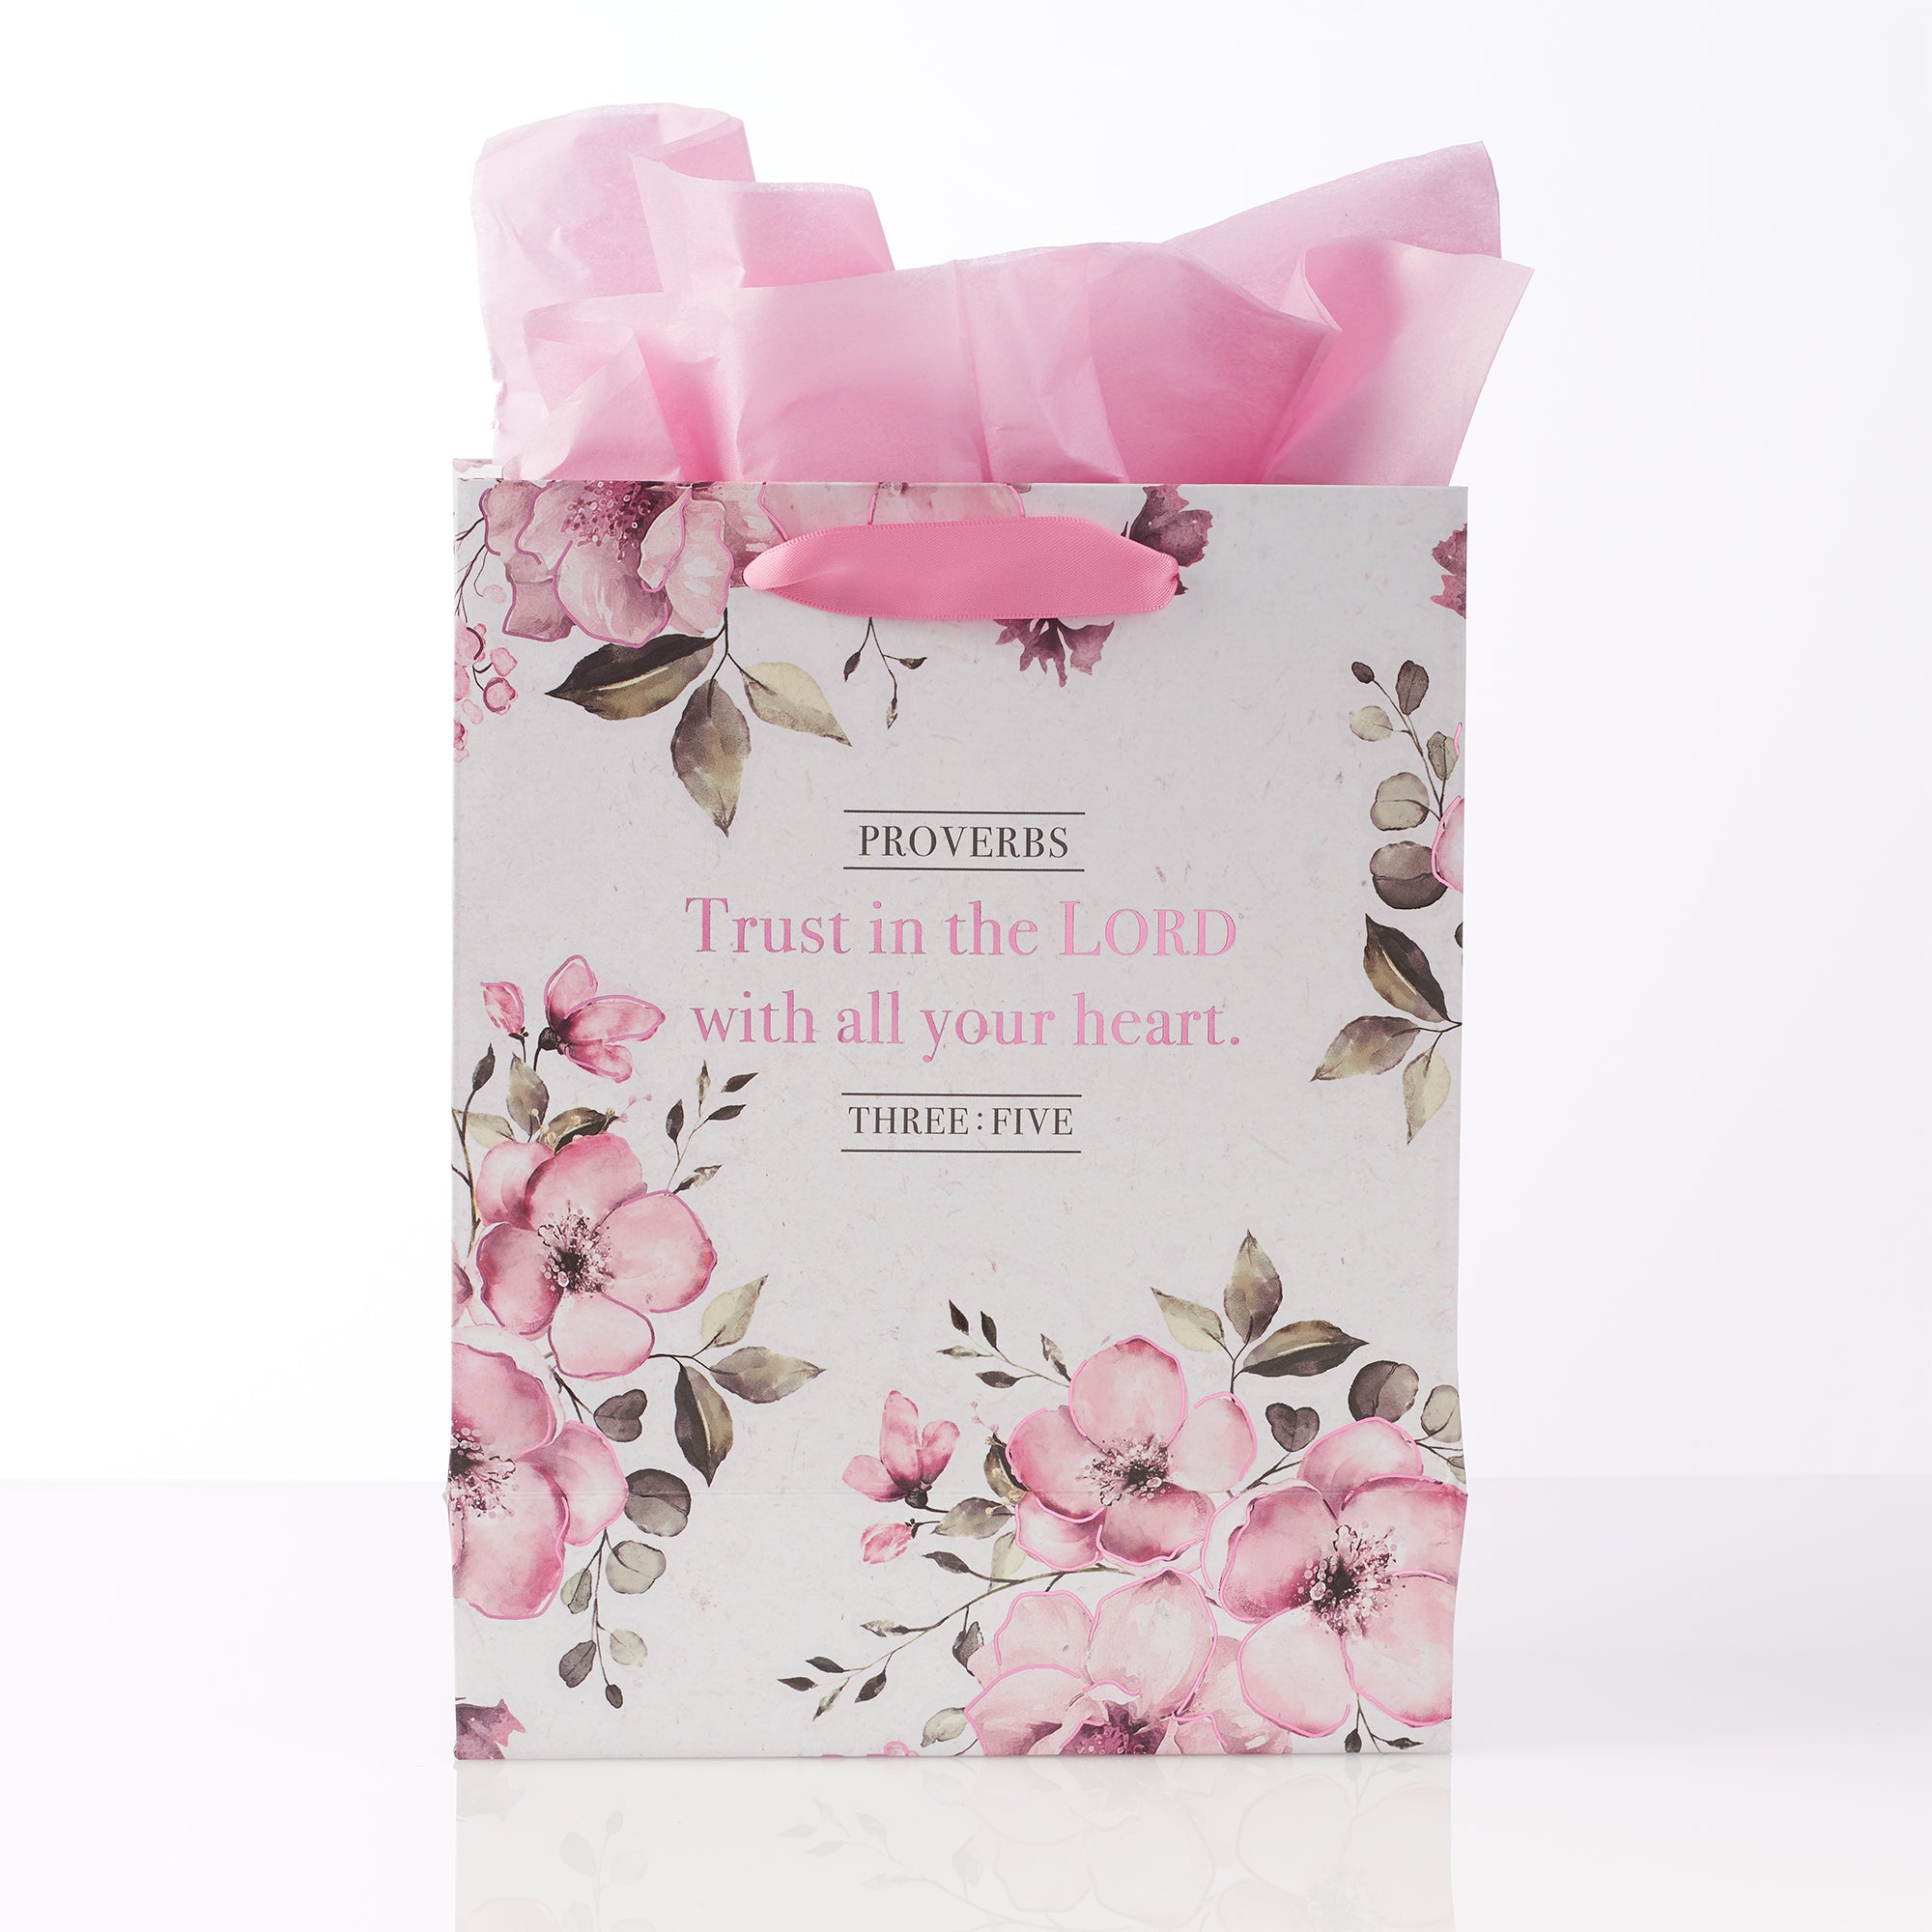 Image of "Trust in the Lord" Medium Gift Bag – Proverbs 3:5 other